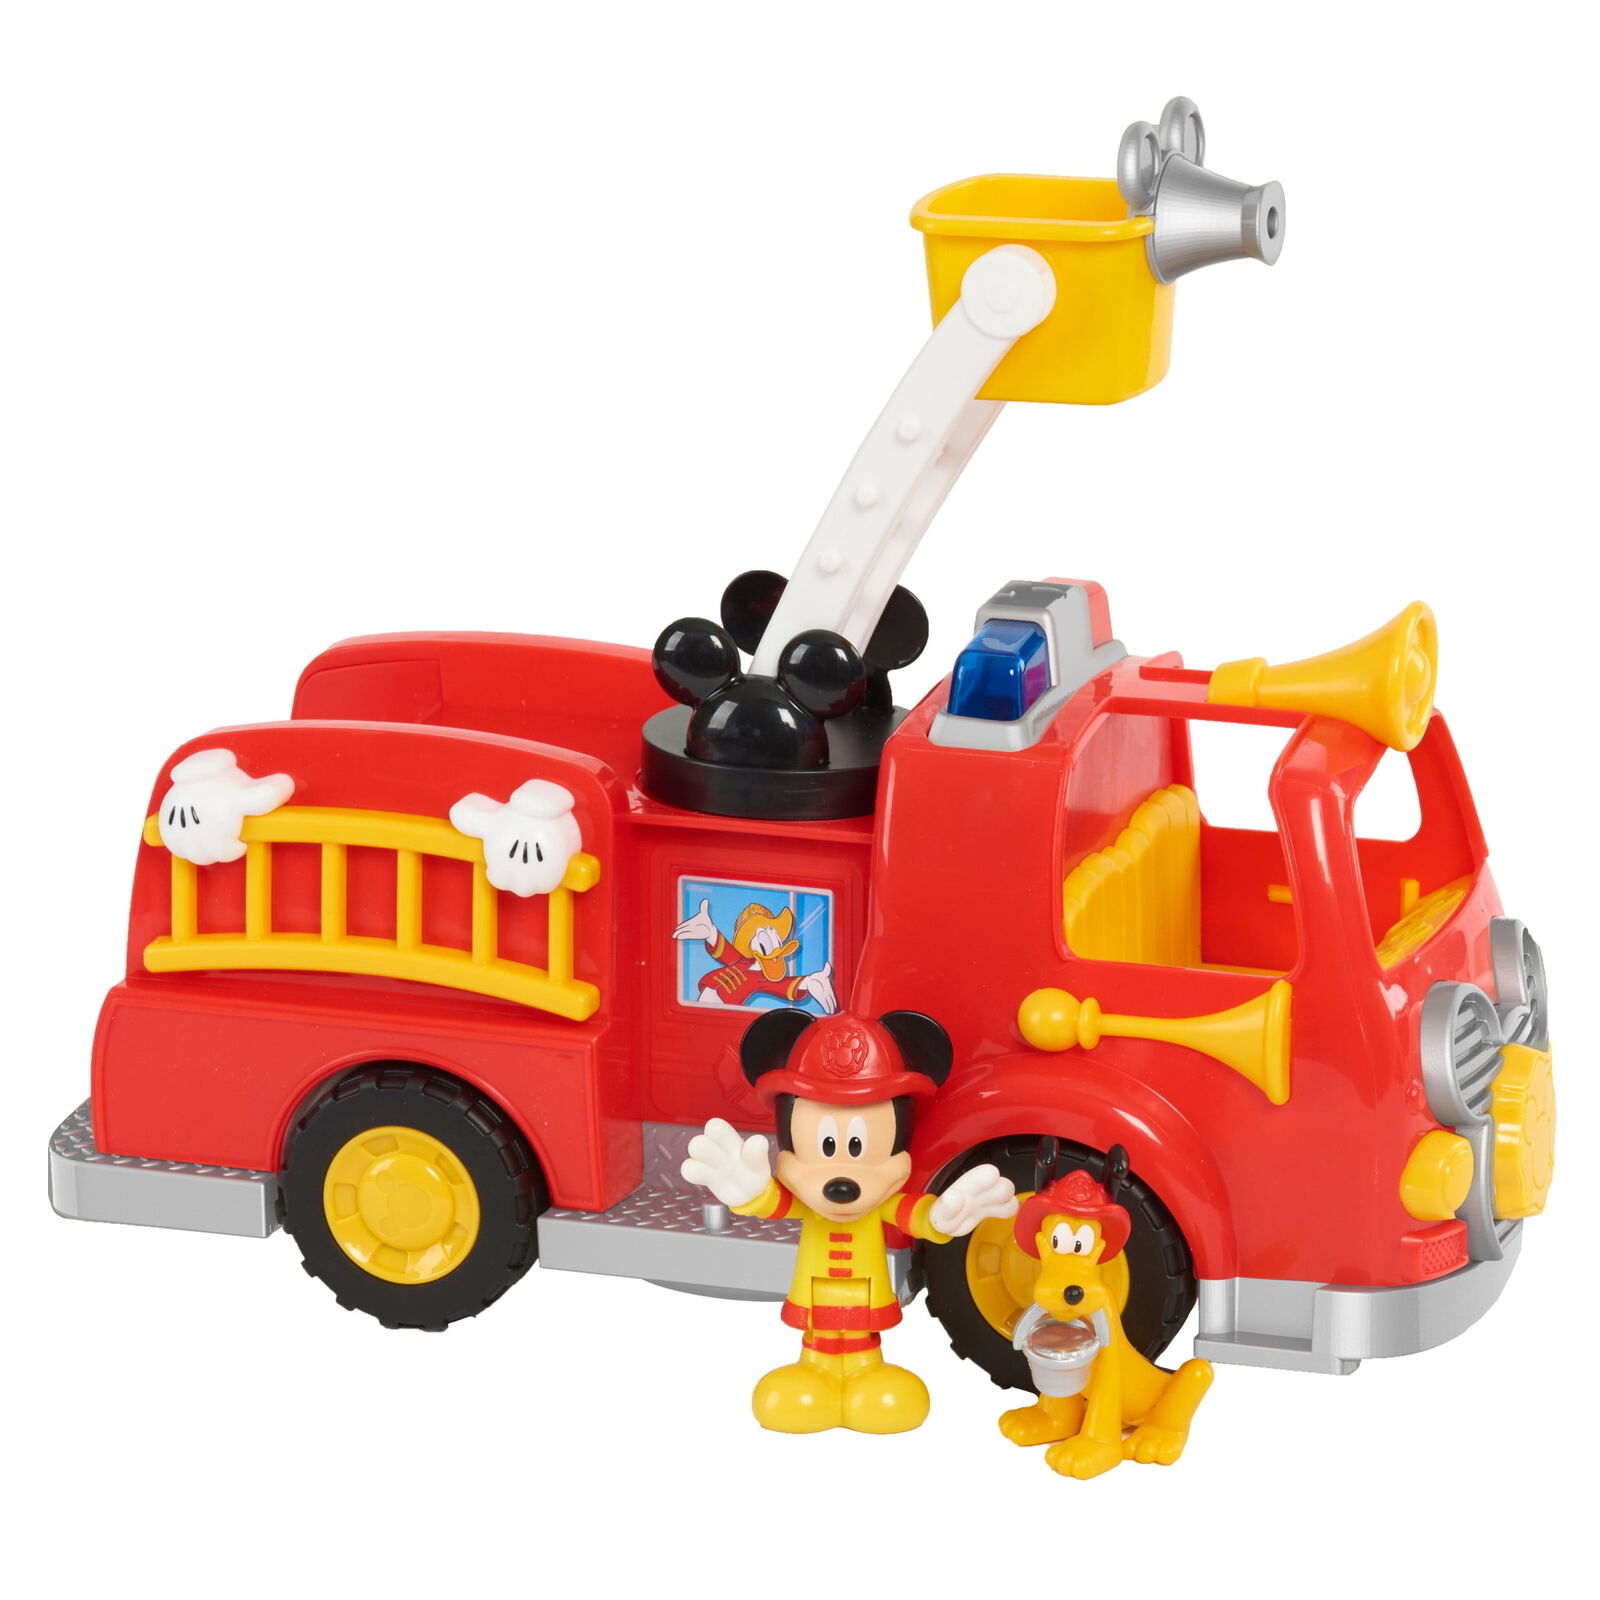 Disney’s Mickey Mouse Mickey’s Fire Engine, Figure and Vehicle Playset Lights